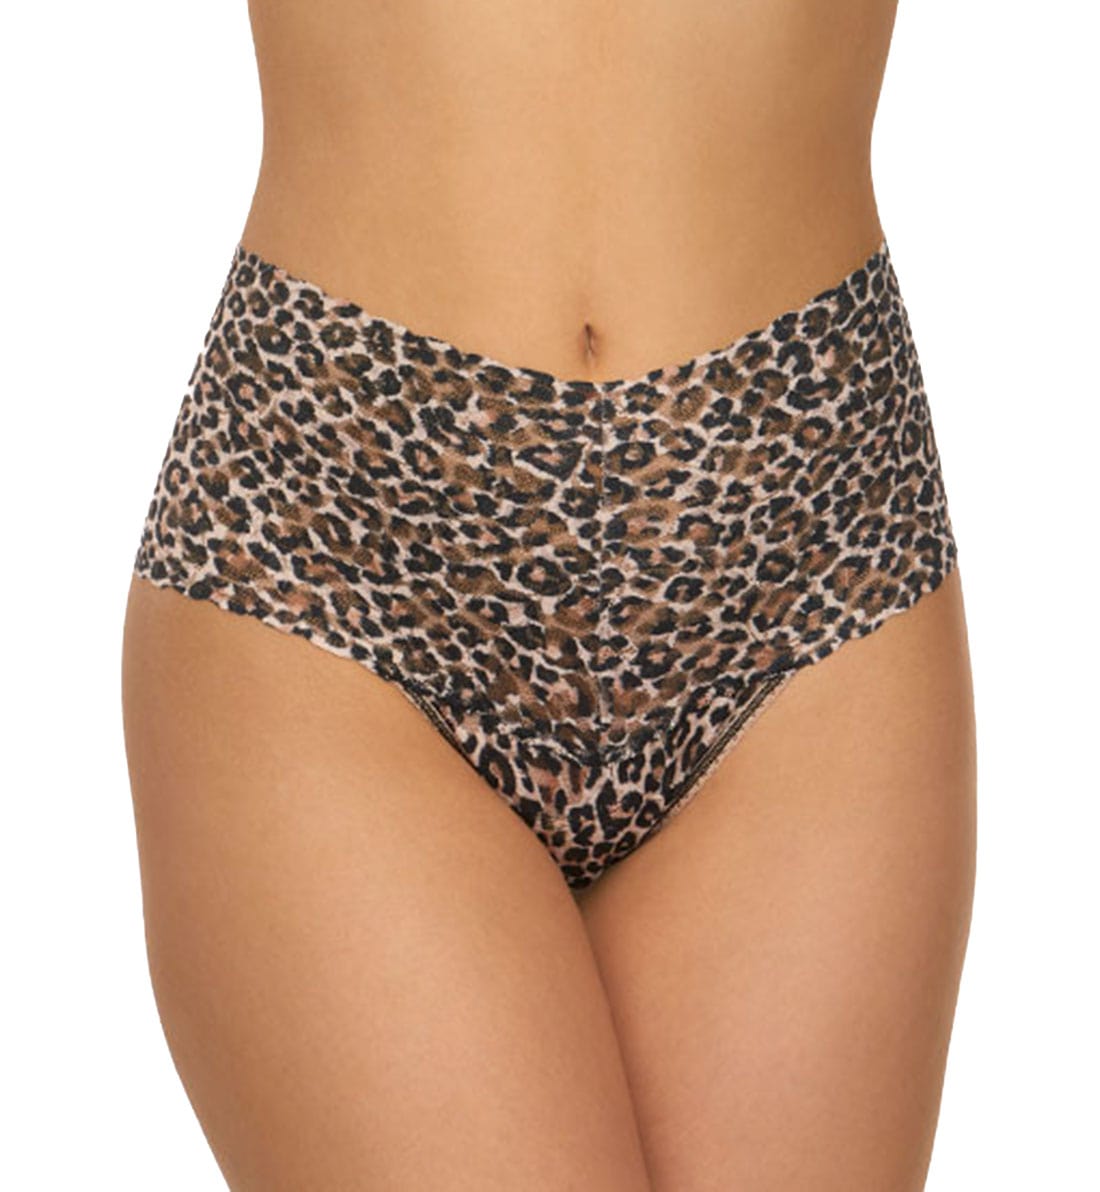 Hanky Panky High-Waist Retro Lace Printed Thong (PR9K1926),Classic Leopard - Brown/Black,One Size